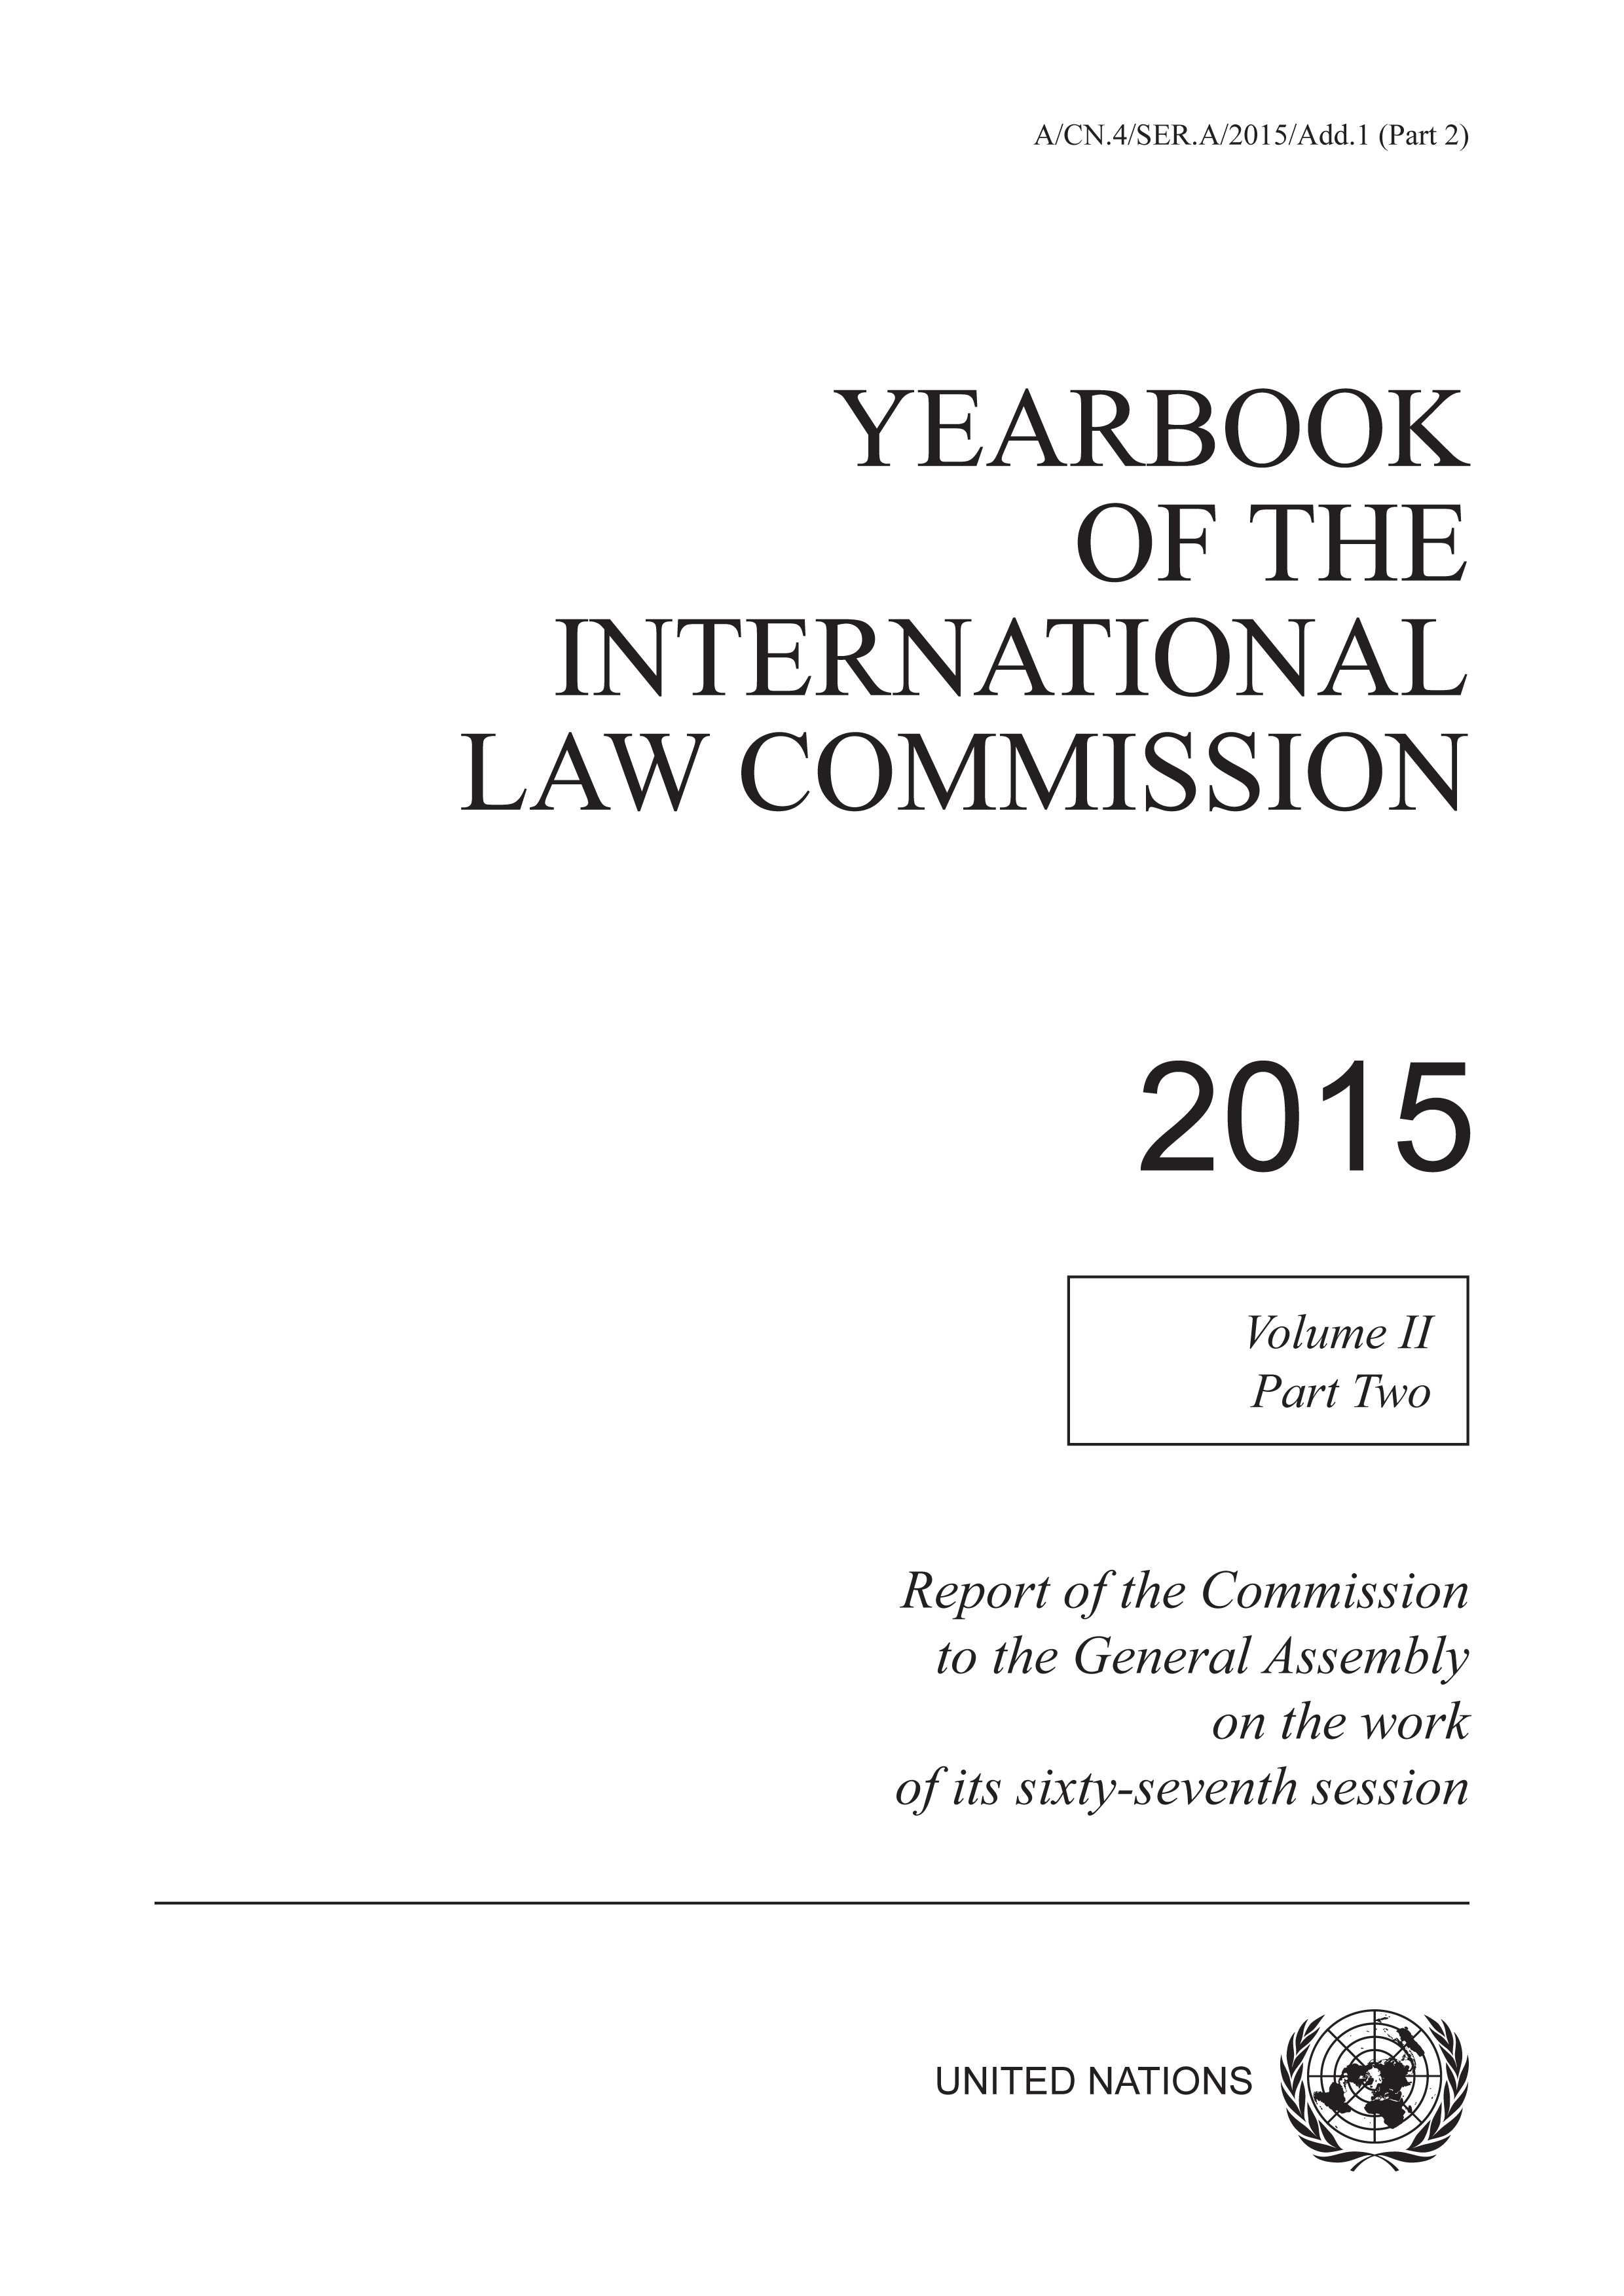 image of Yearbook of the International Law Commission 2015, Vol. II, Part 2